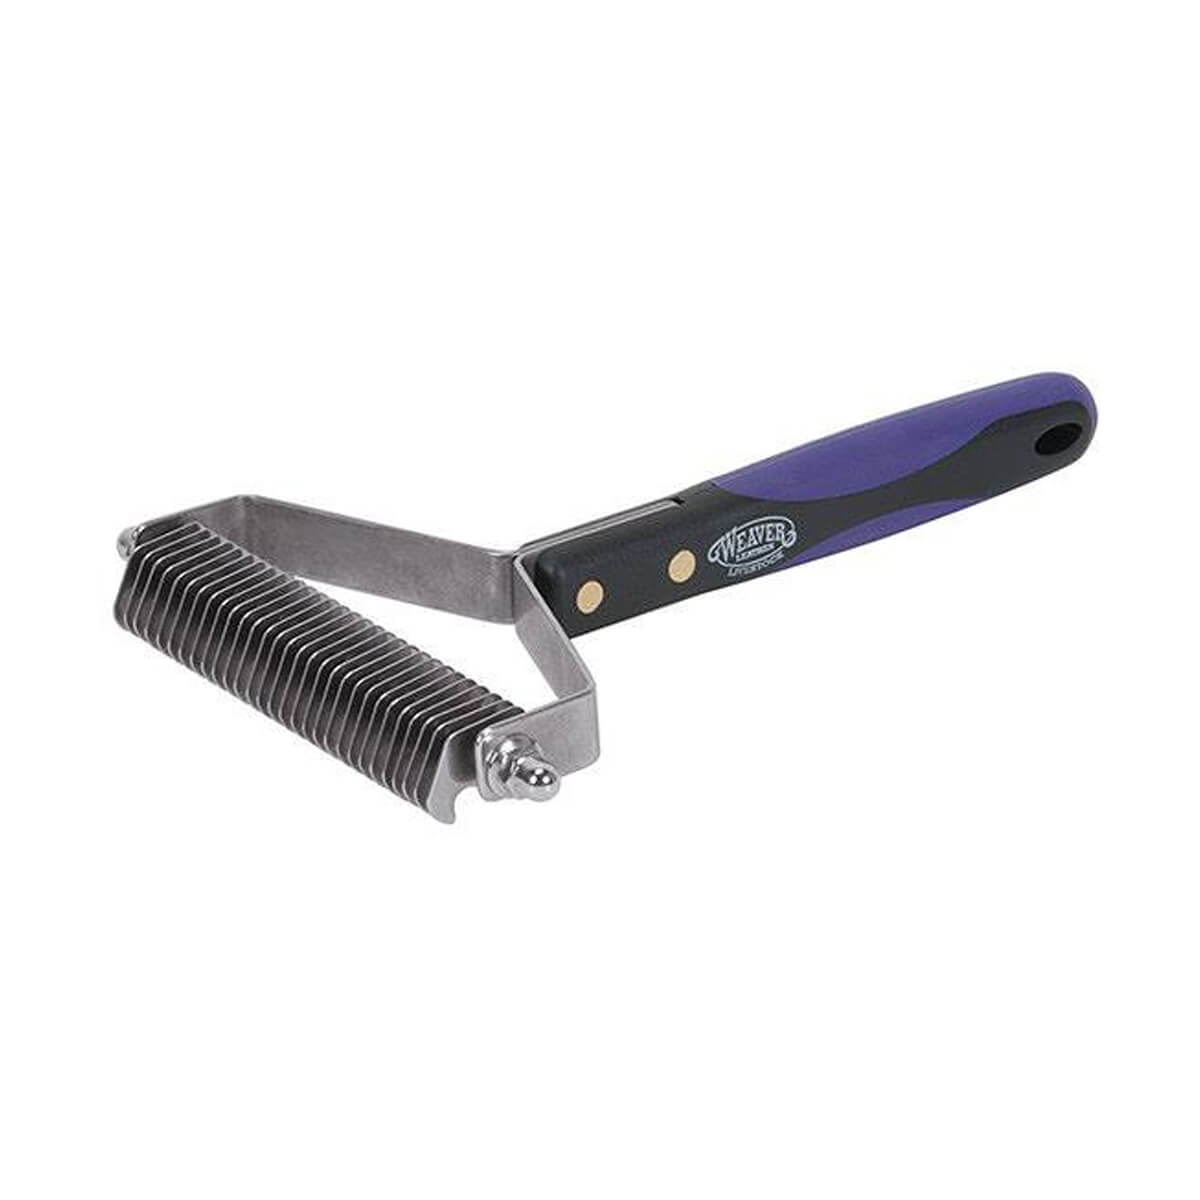 Shedding Comb for Livestock - 4-in